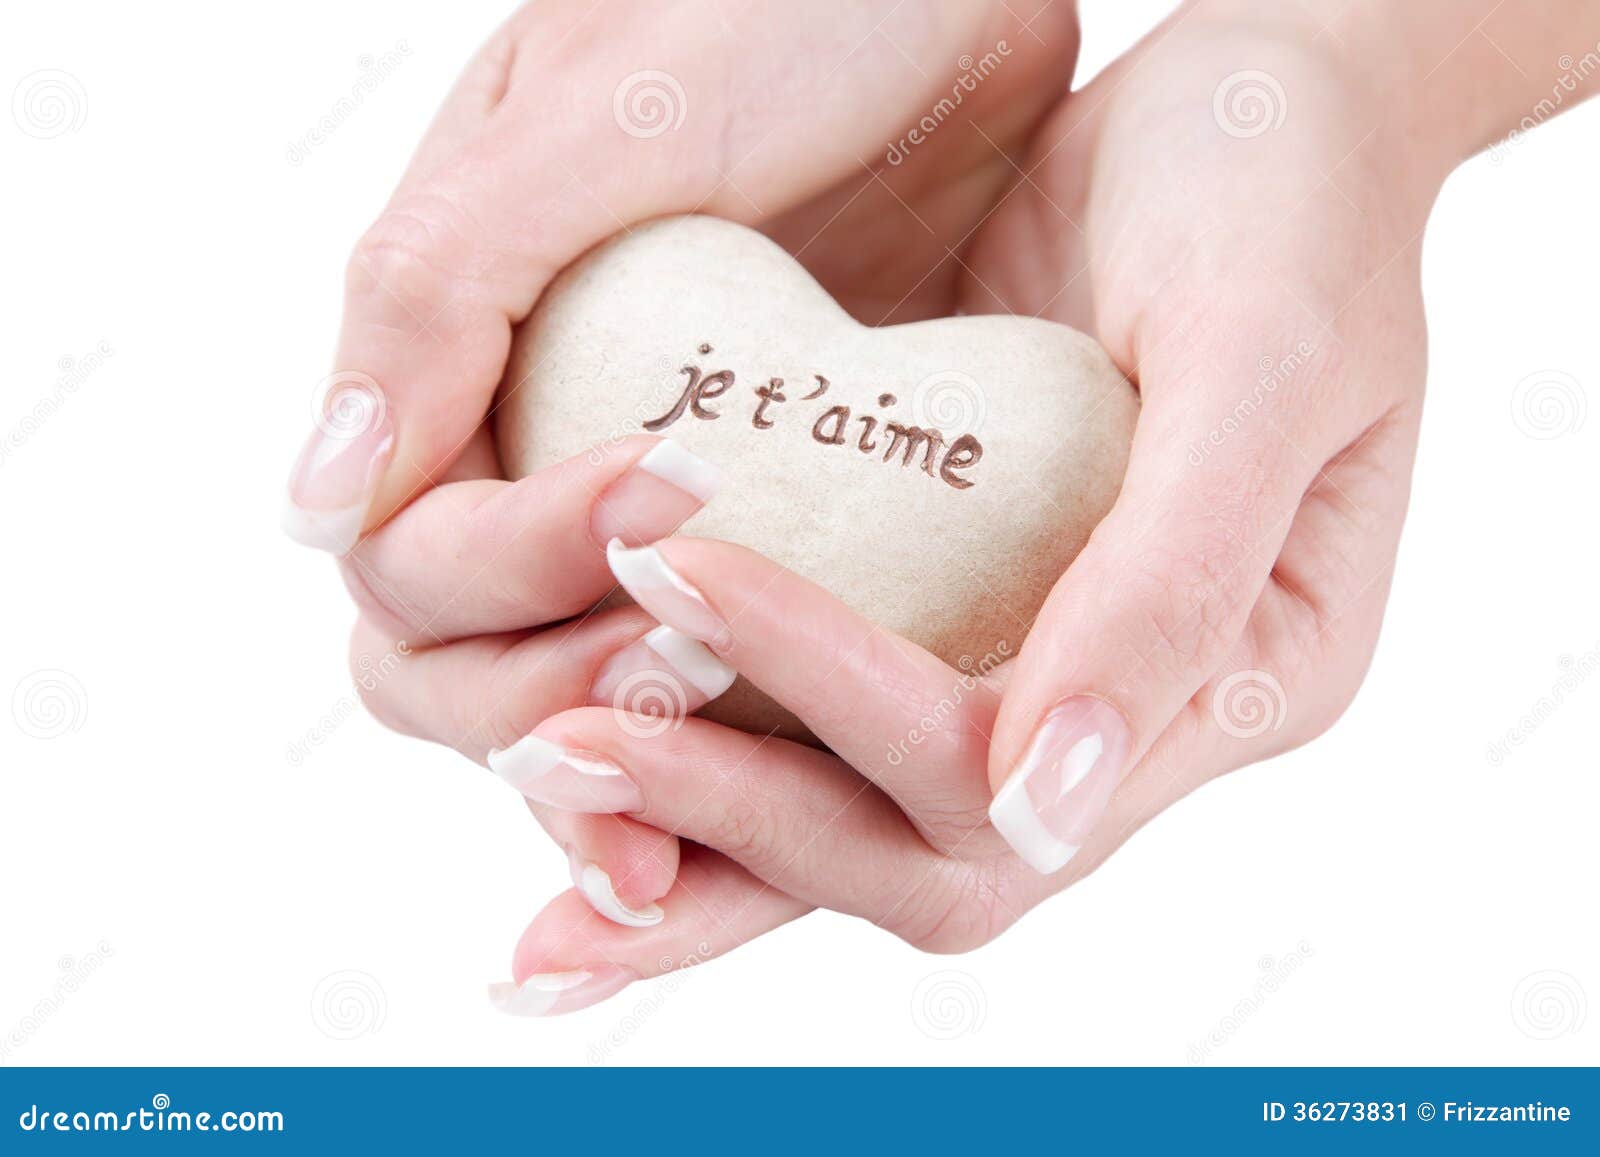 Heart In Hand Isolated With French Words For I Love You Stock